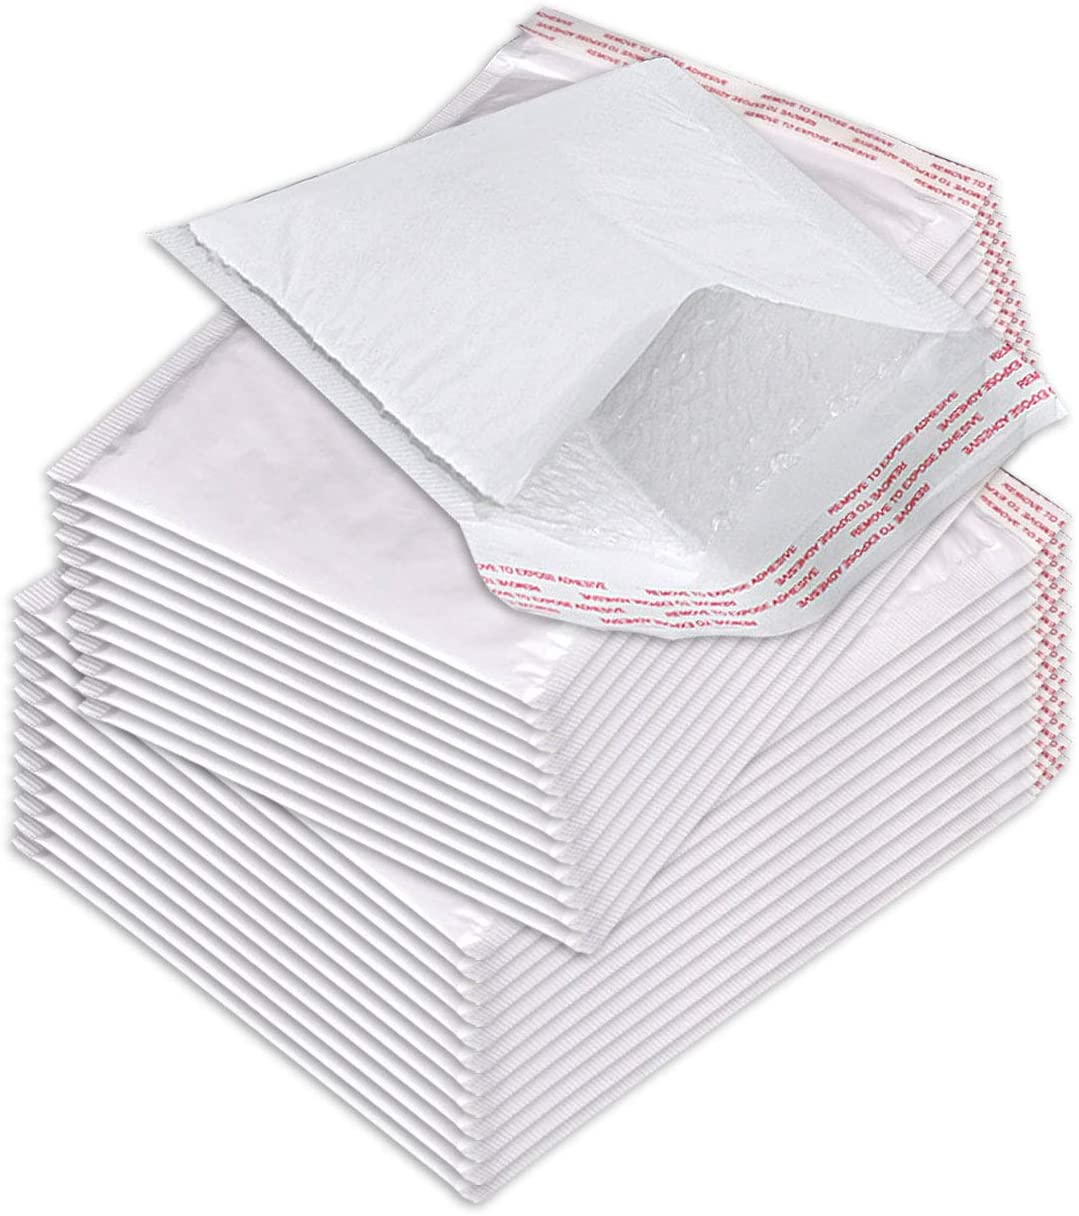 BM Paper 500pcs #0 6x10" Poly Bubble Lined Polyolefin Mailers Padded Shipping Envelopes